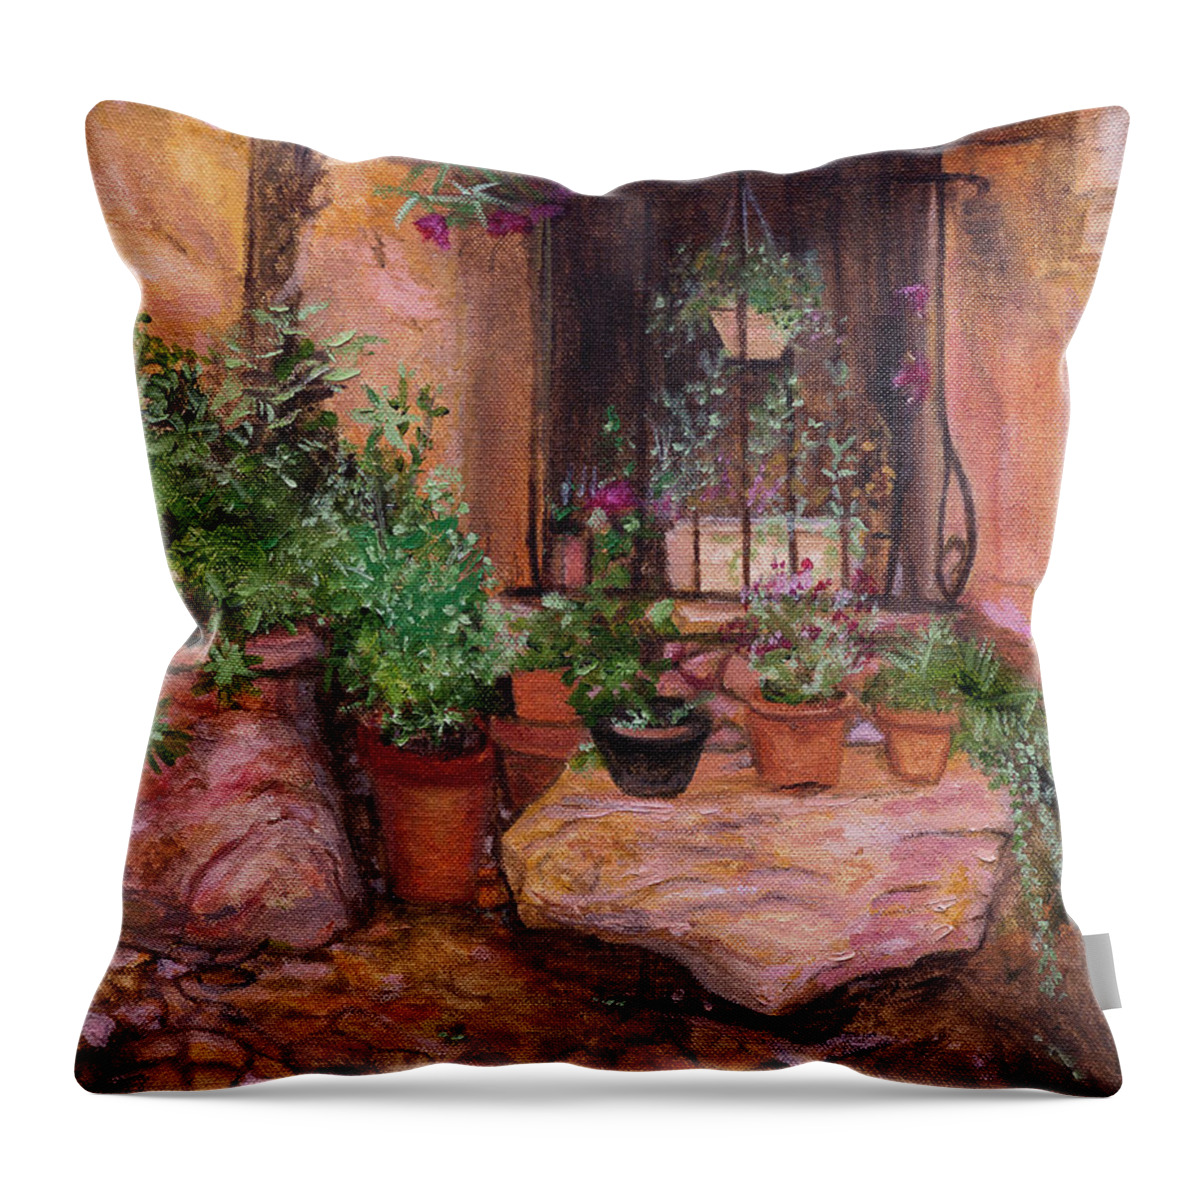 Provence Throw Pillow featuring the painting Provence by Kathy Knopp